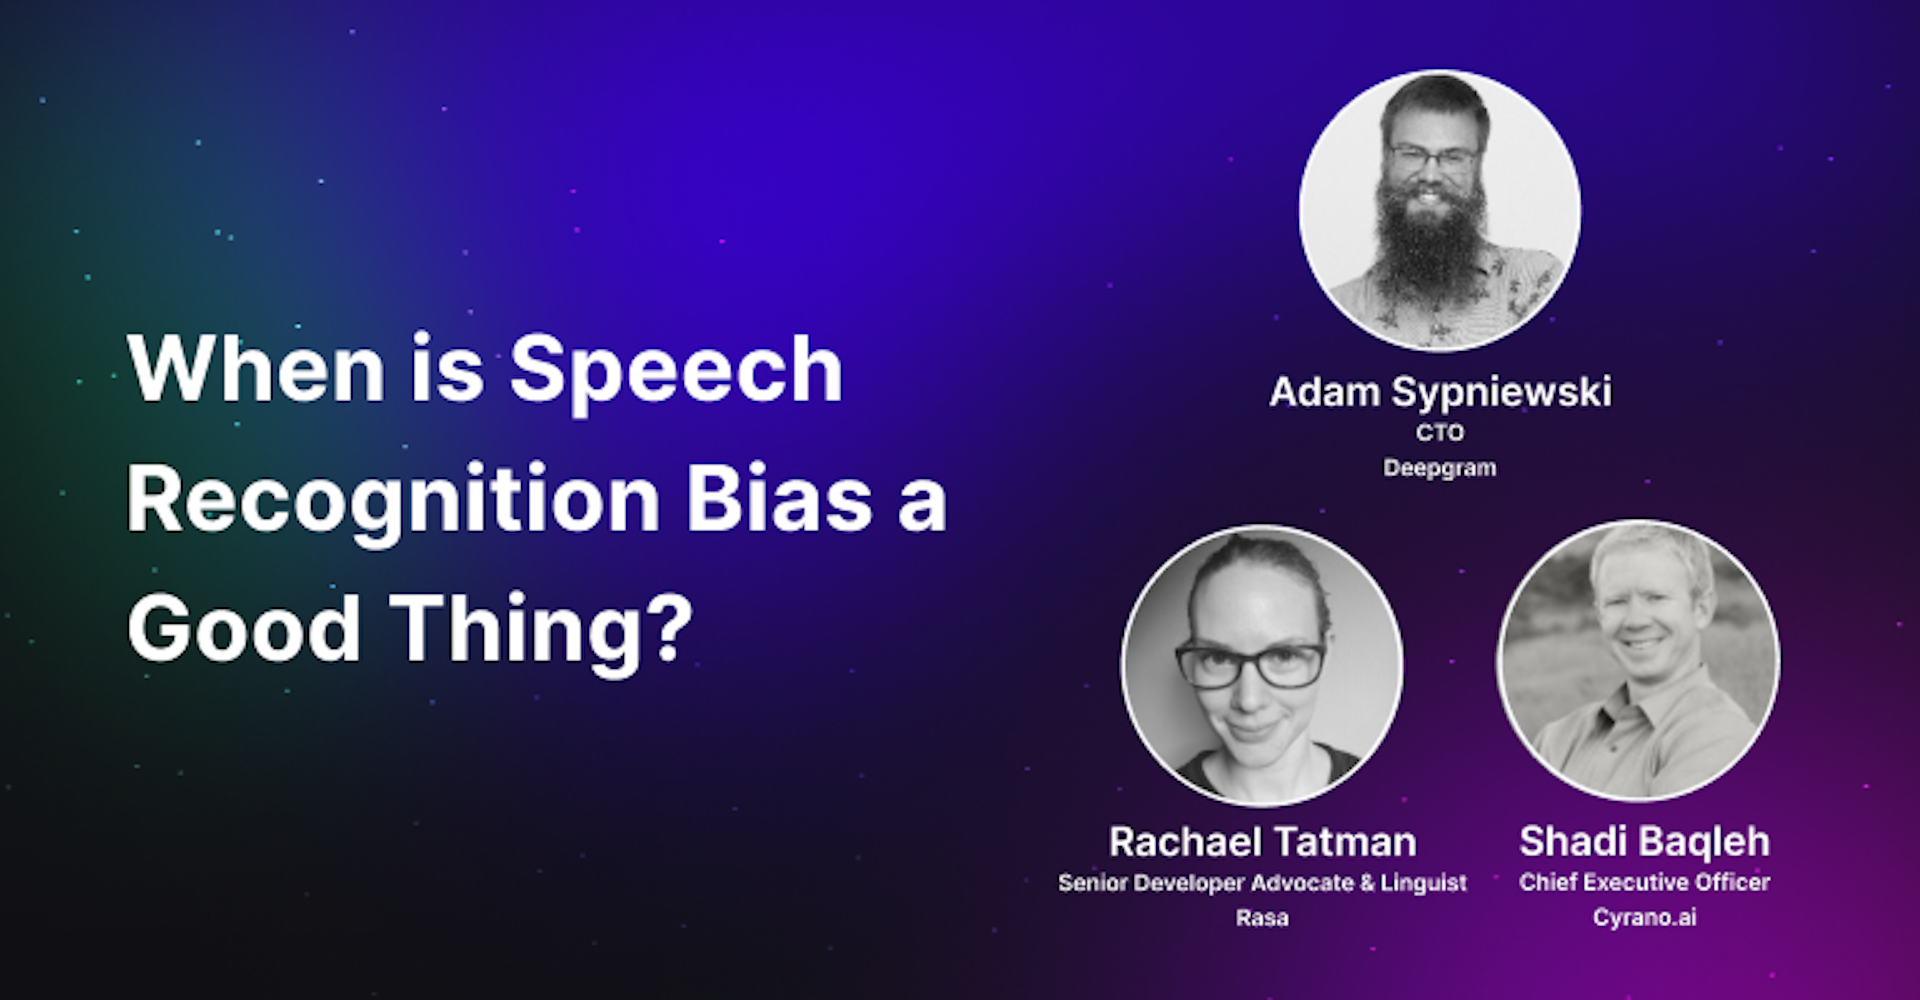 When is Speech Recognition Bias a Good Thing?